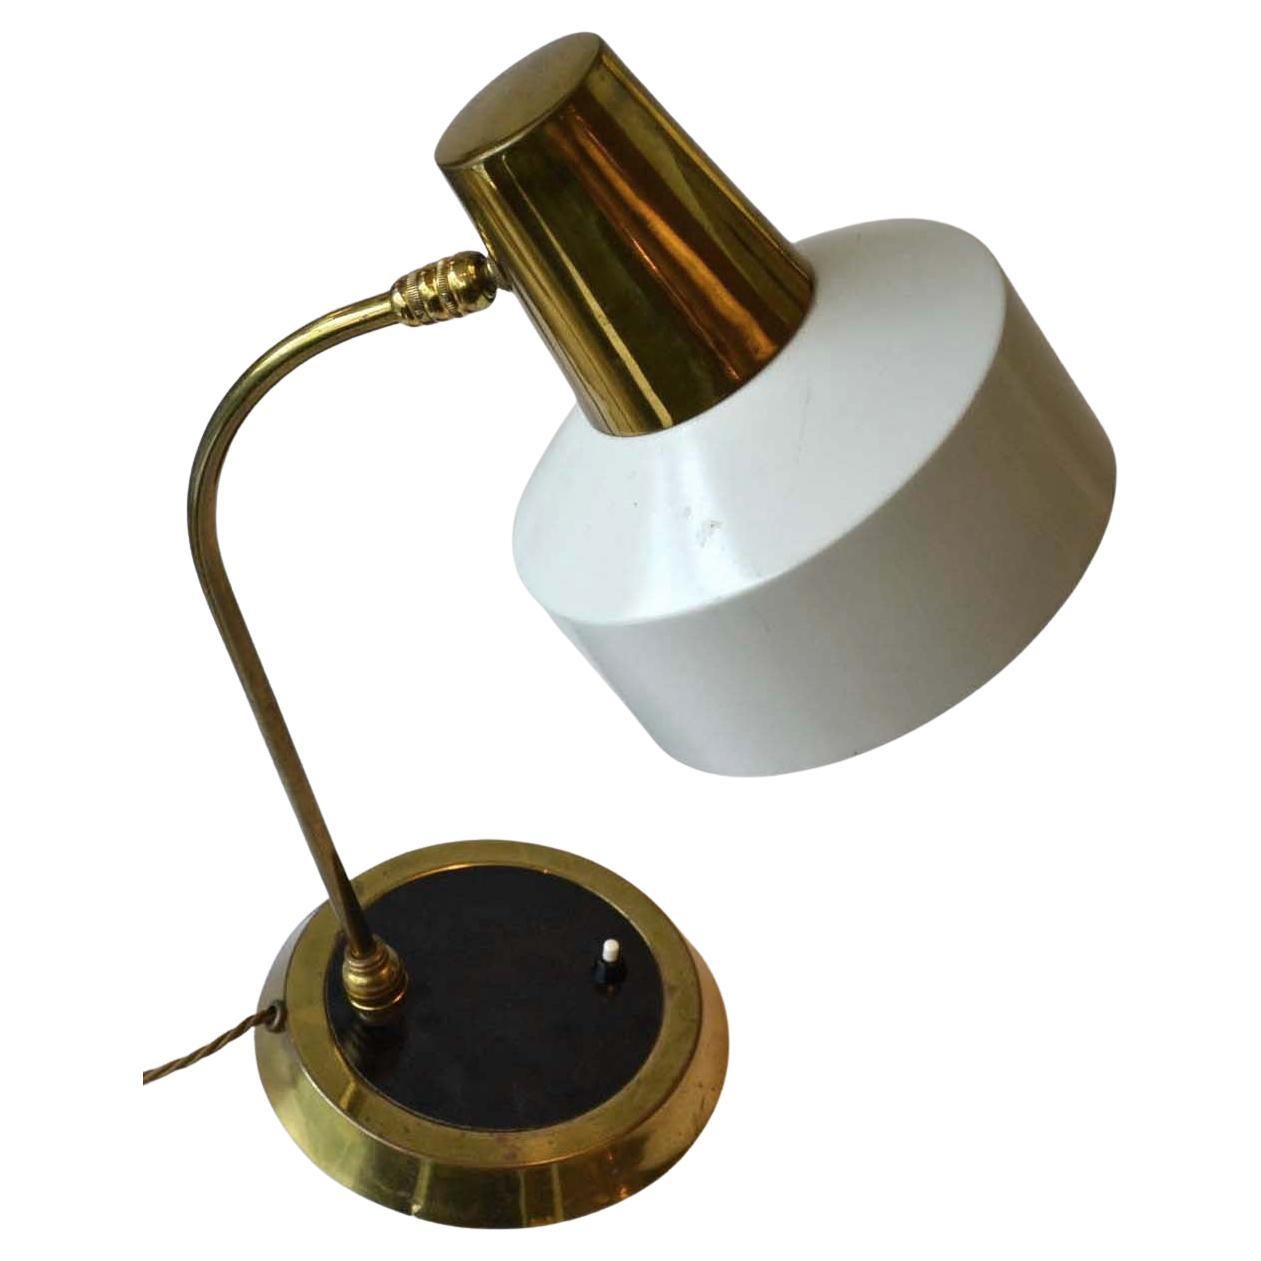 Modernist desk lamp in brass and black with cream metal shade is fully adjustable at two points, at the bottom and at the top of the arm. Very functional lamp with its original patina, Czech 1950's.